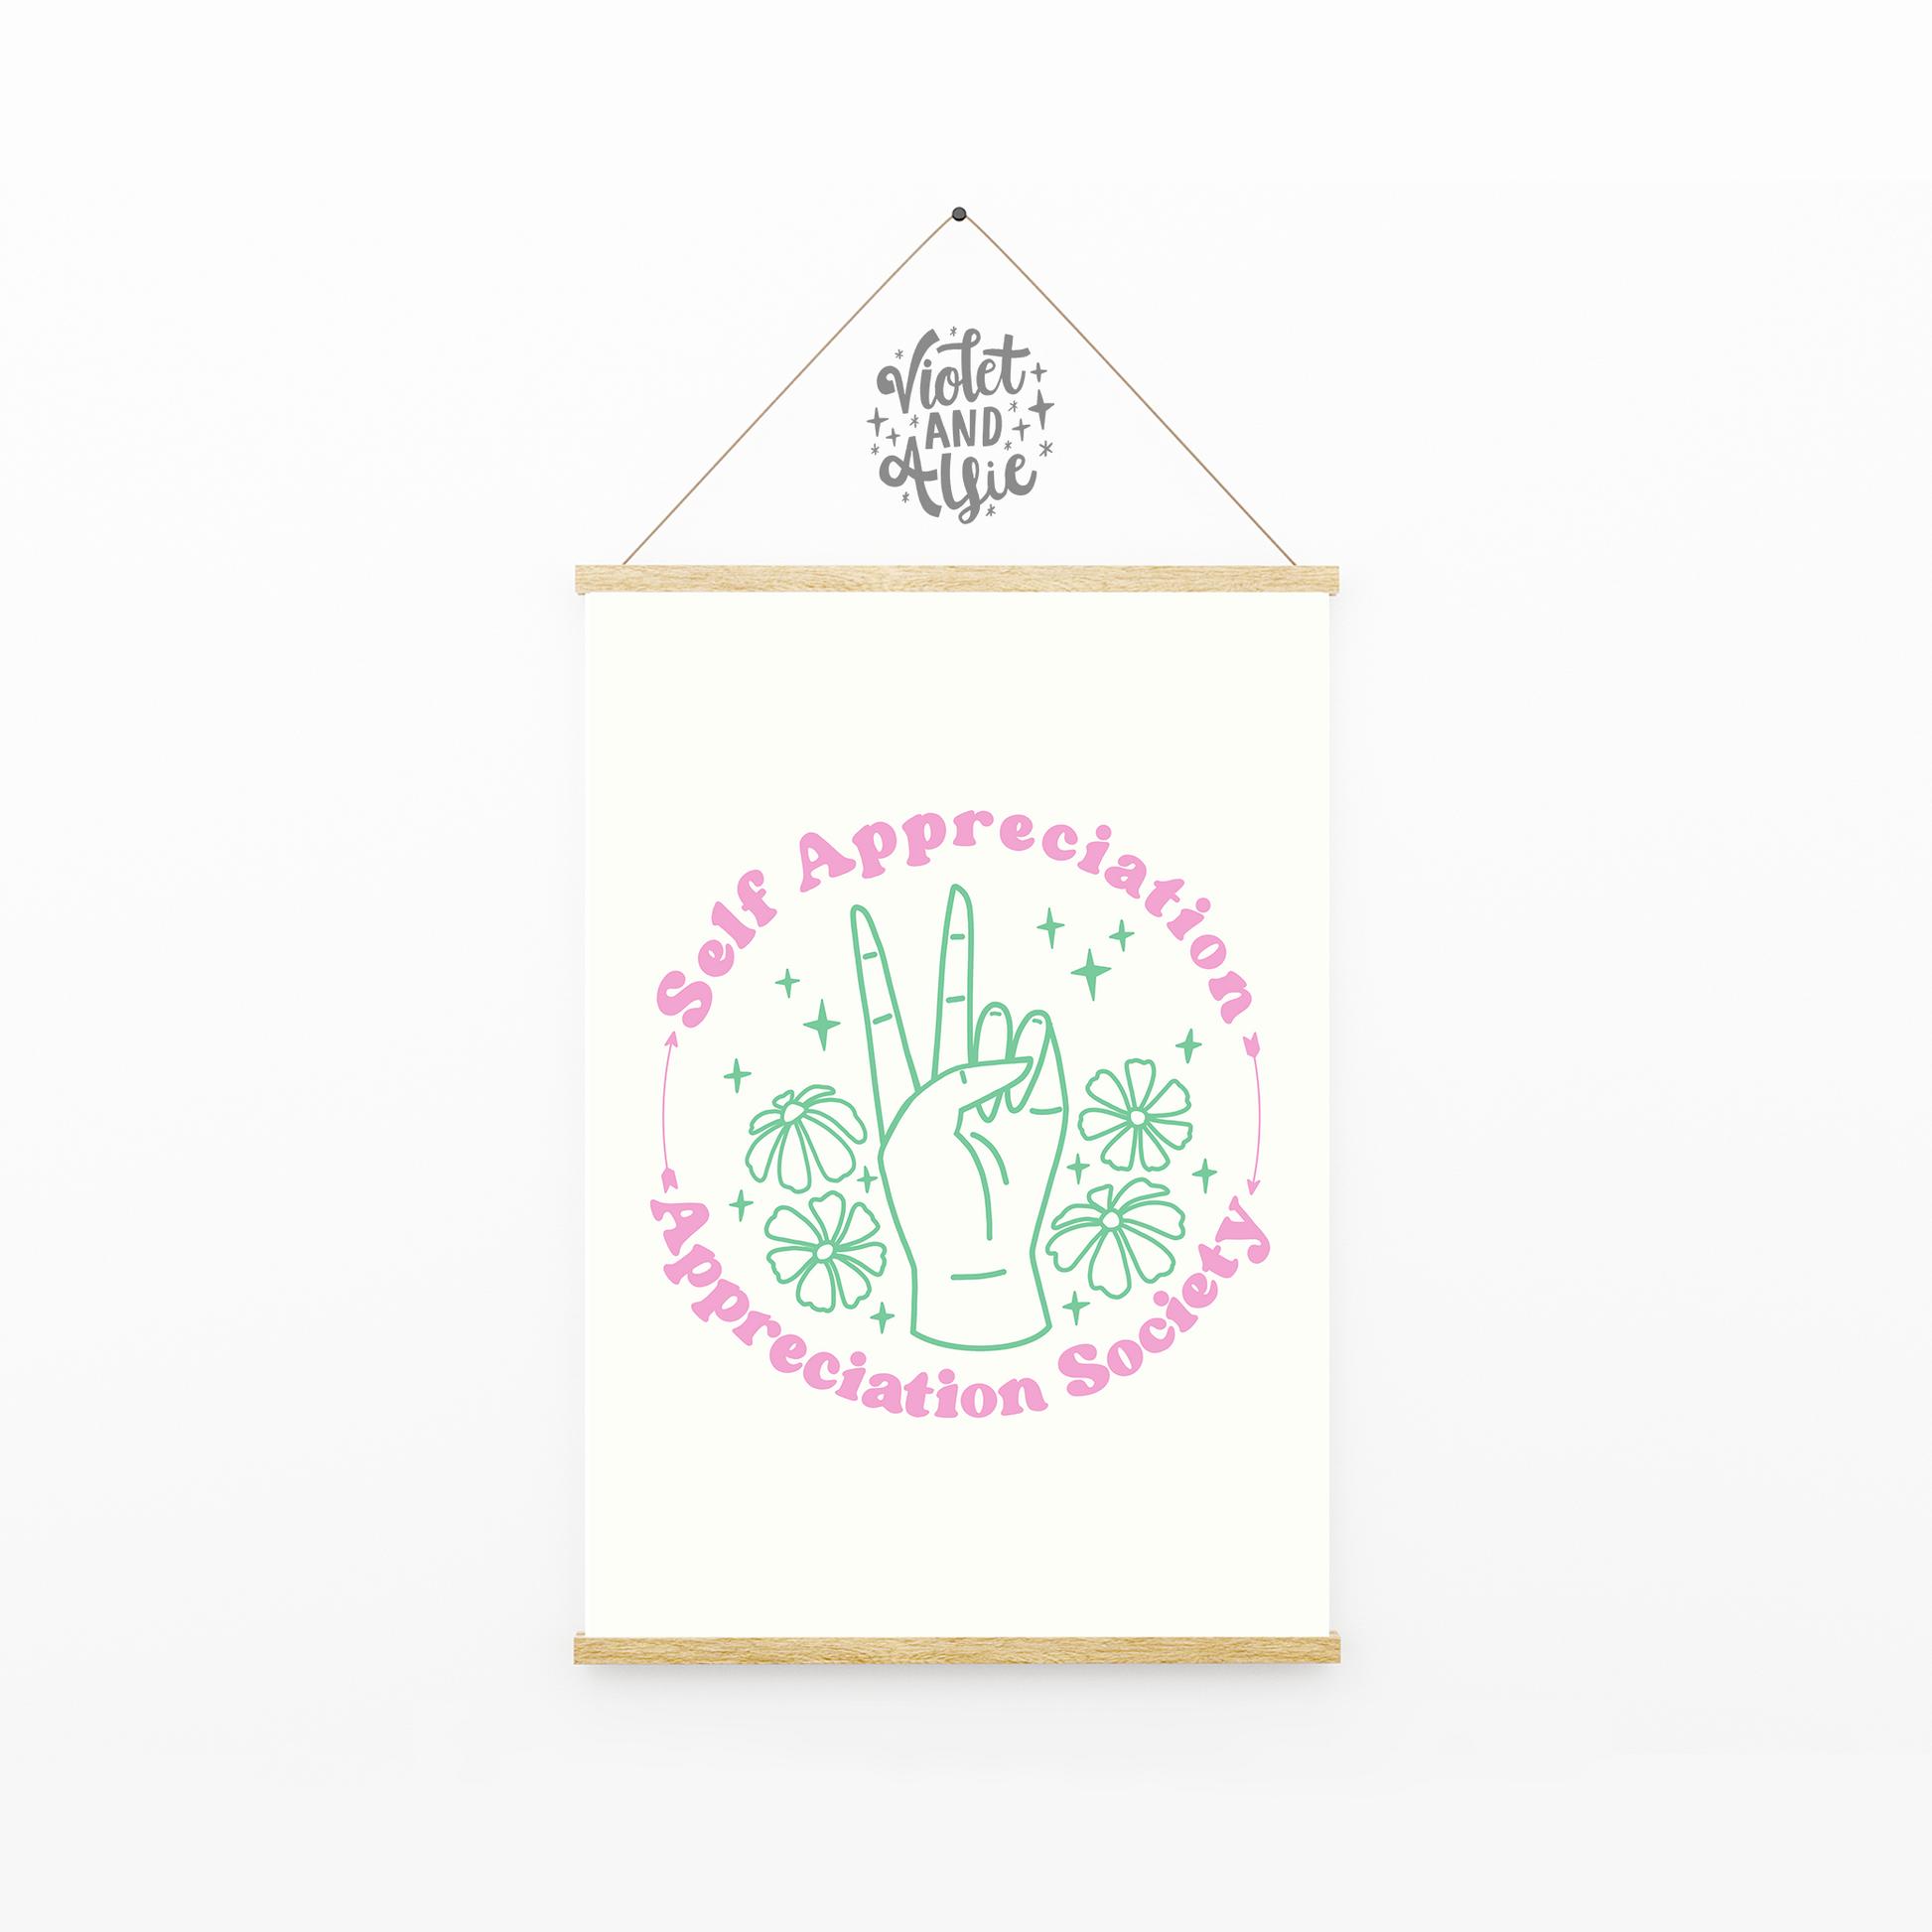 Self Appreciation Appreciation Society' This bright and positive print is a little reminder to love and appreciate your sweet self!  Self Appreciation Society Print, Positivity Poster, Feminist Print, Prints For Women, Confidence Gift, Encouragement Gift, Peace Sign Hand Illustration 